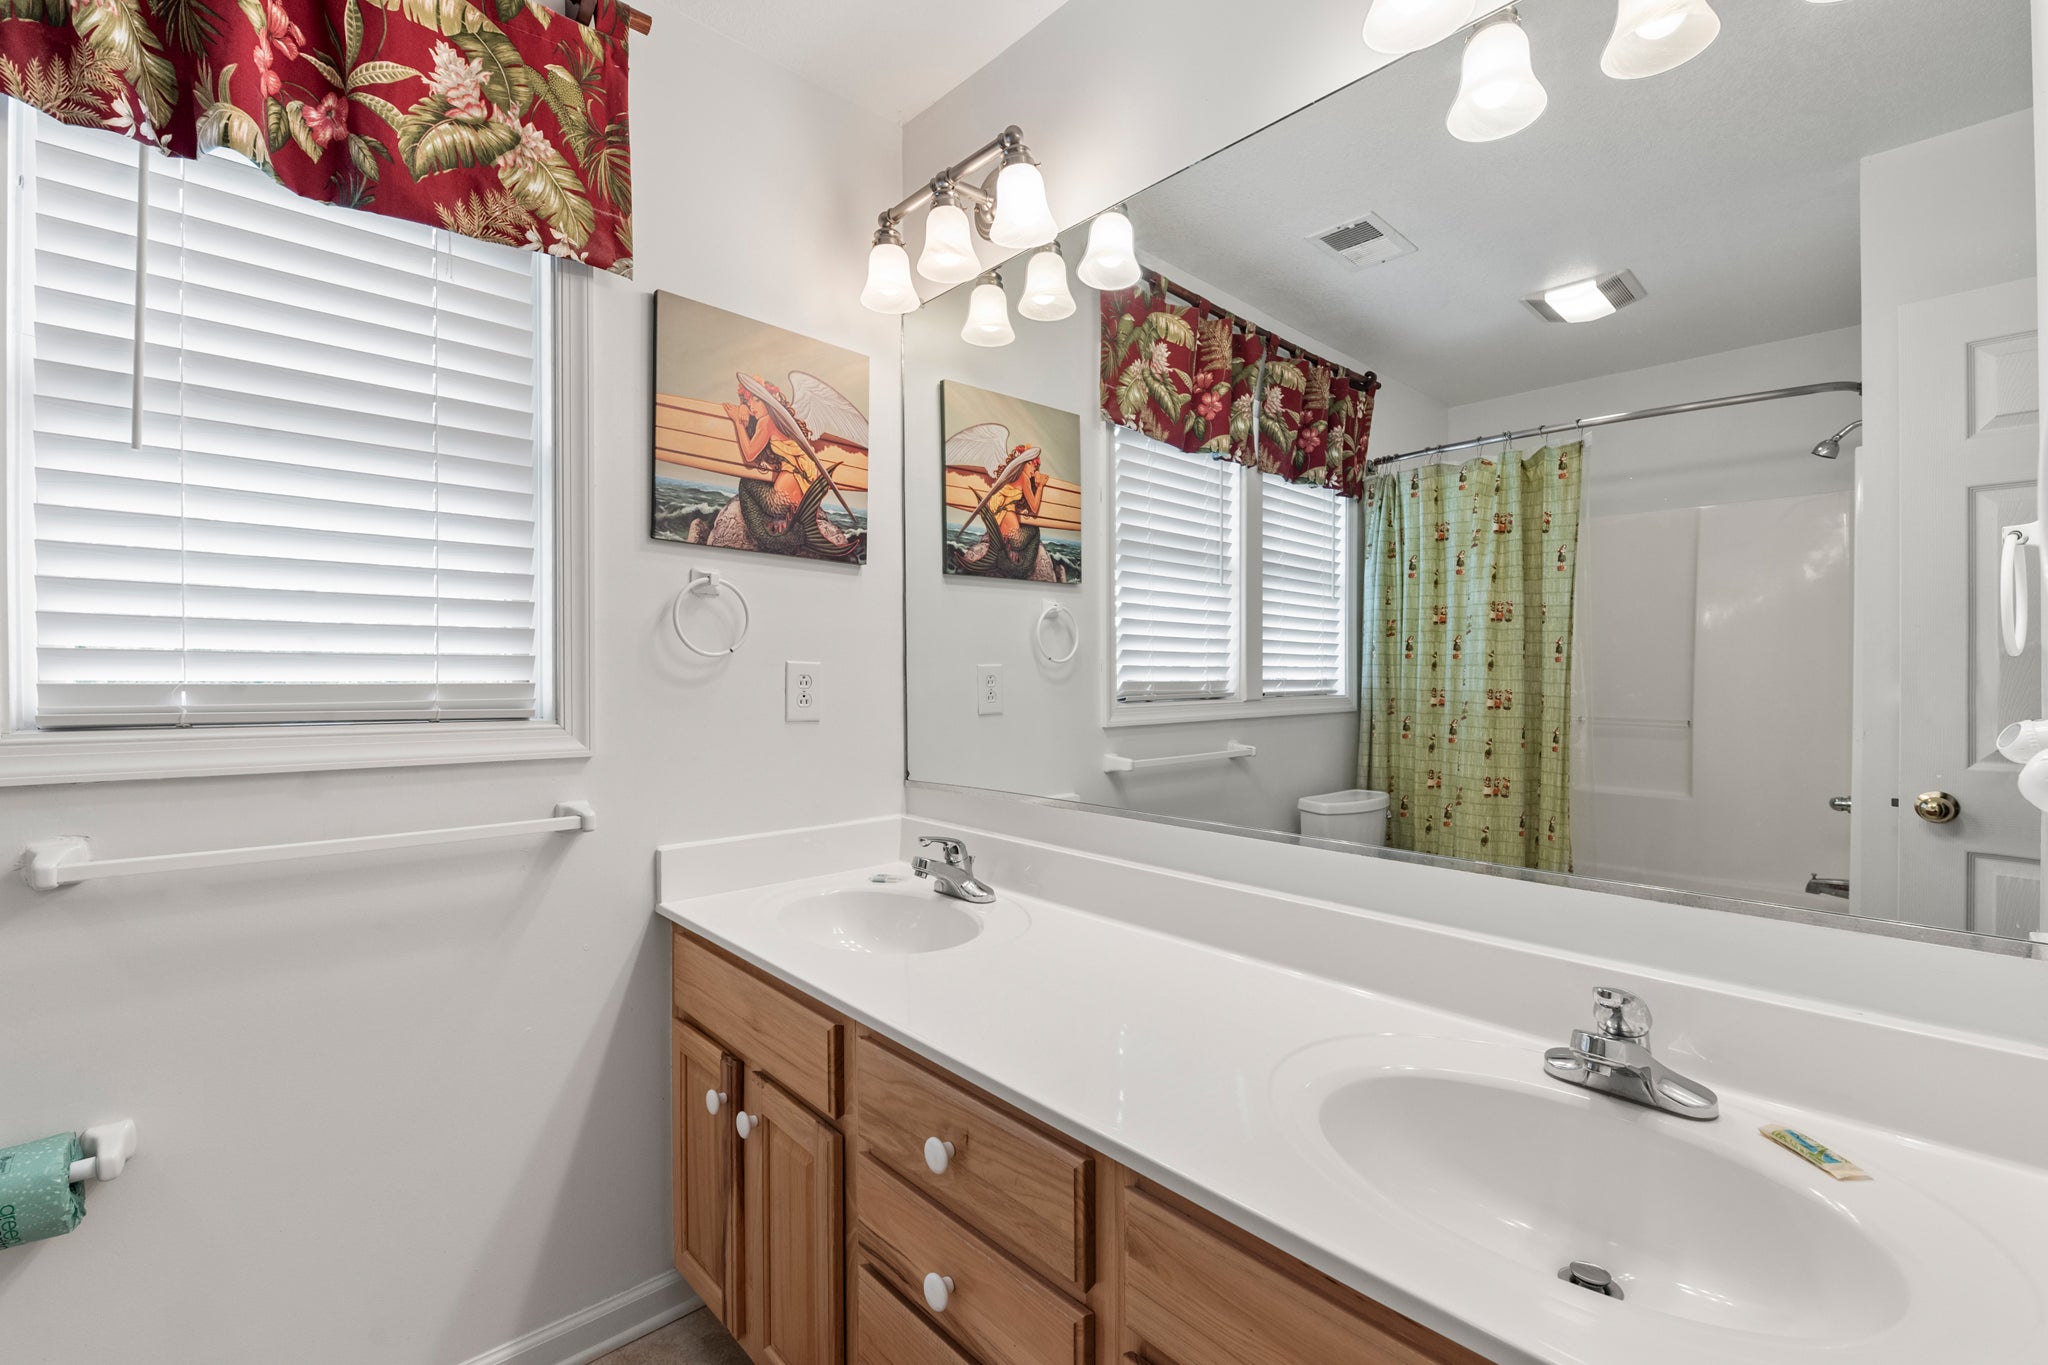 CL572: Endless Sunsets in Corolla Light l Top Level Bedroom 5 Private Bath